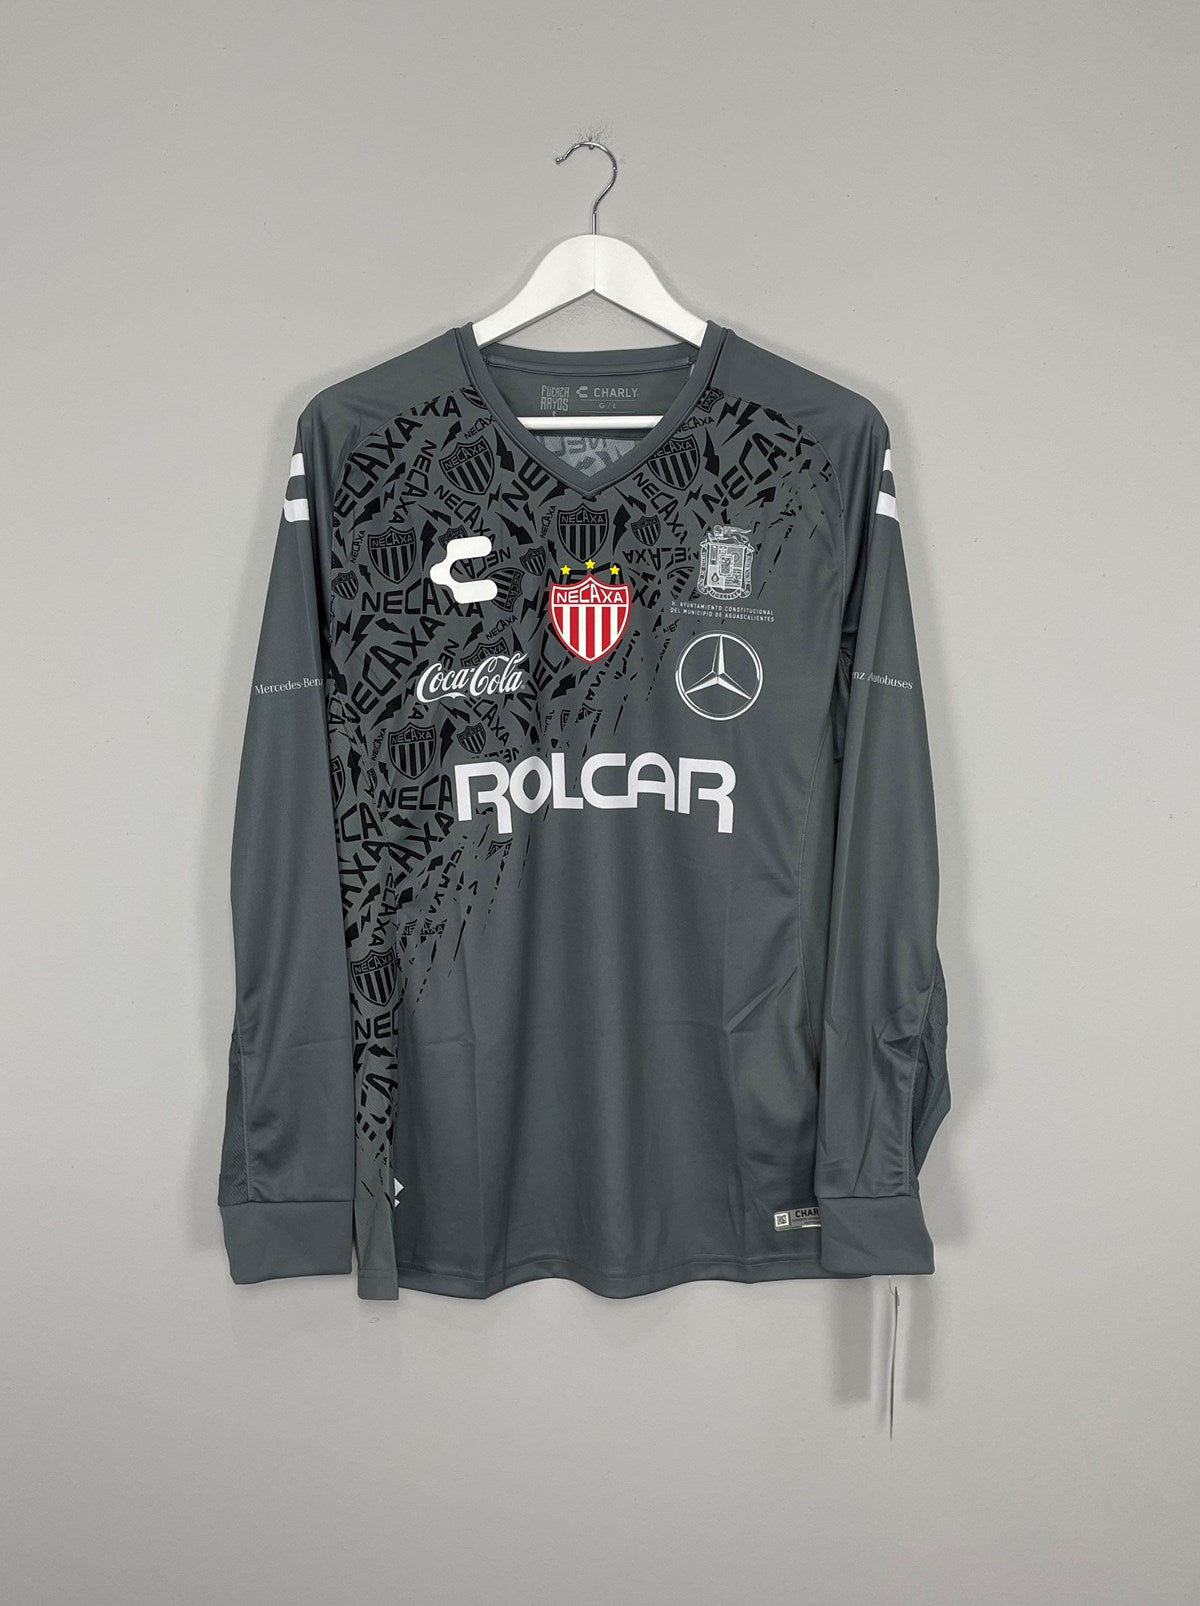 2019/20 NECAXA L/S AWAY SHIRT (MULTIPLE SIZES) CHARLY FUTBOL, Large / Other Mexican Clubs / 2019